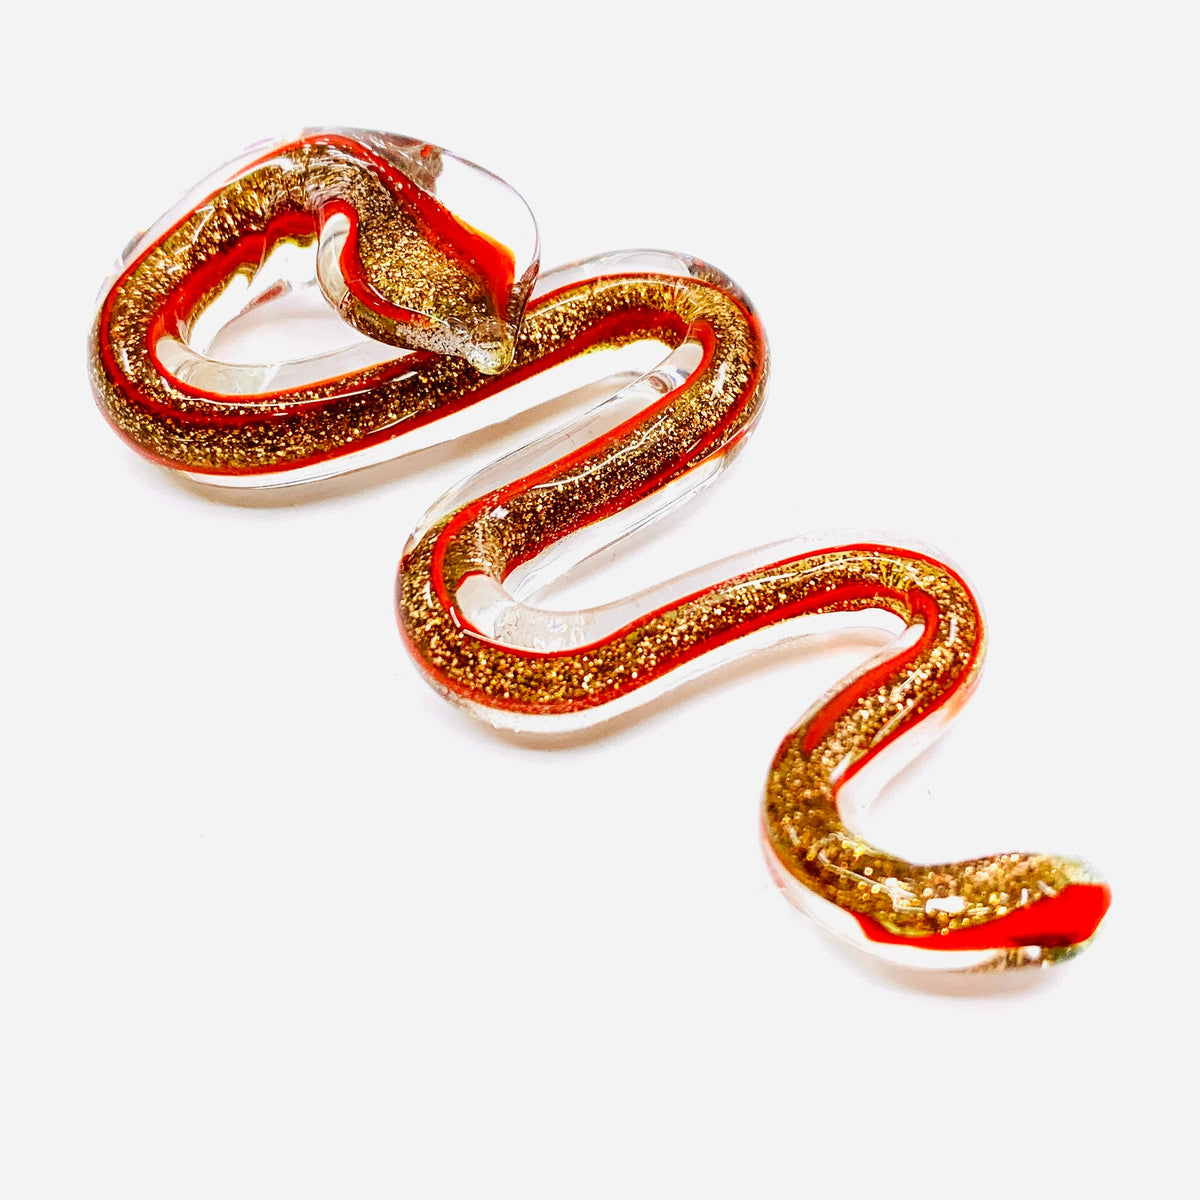 Glitter Snake Miniature - Red and Gold 